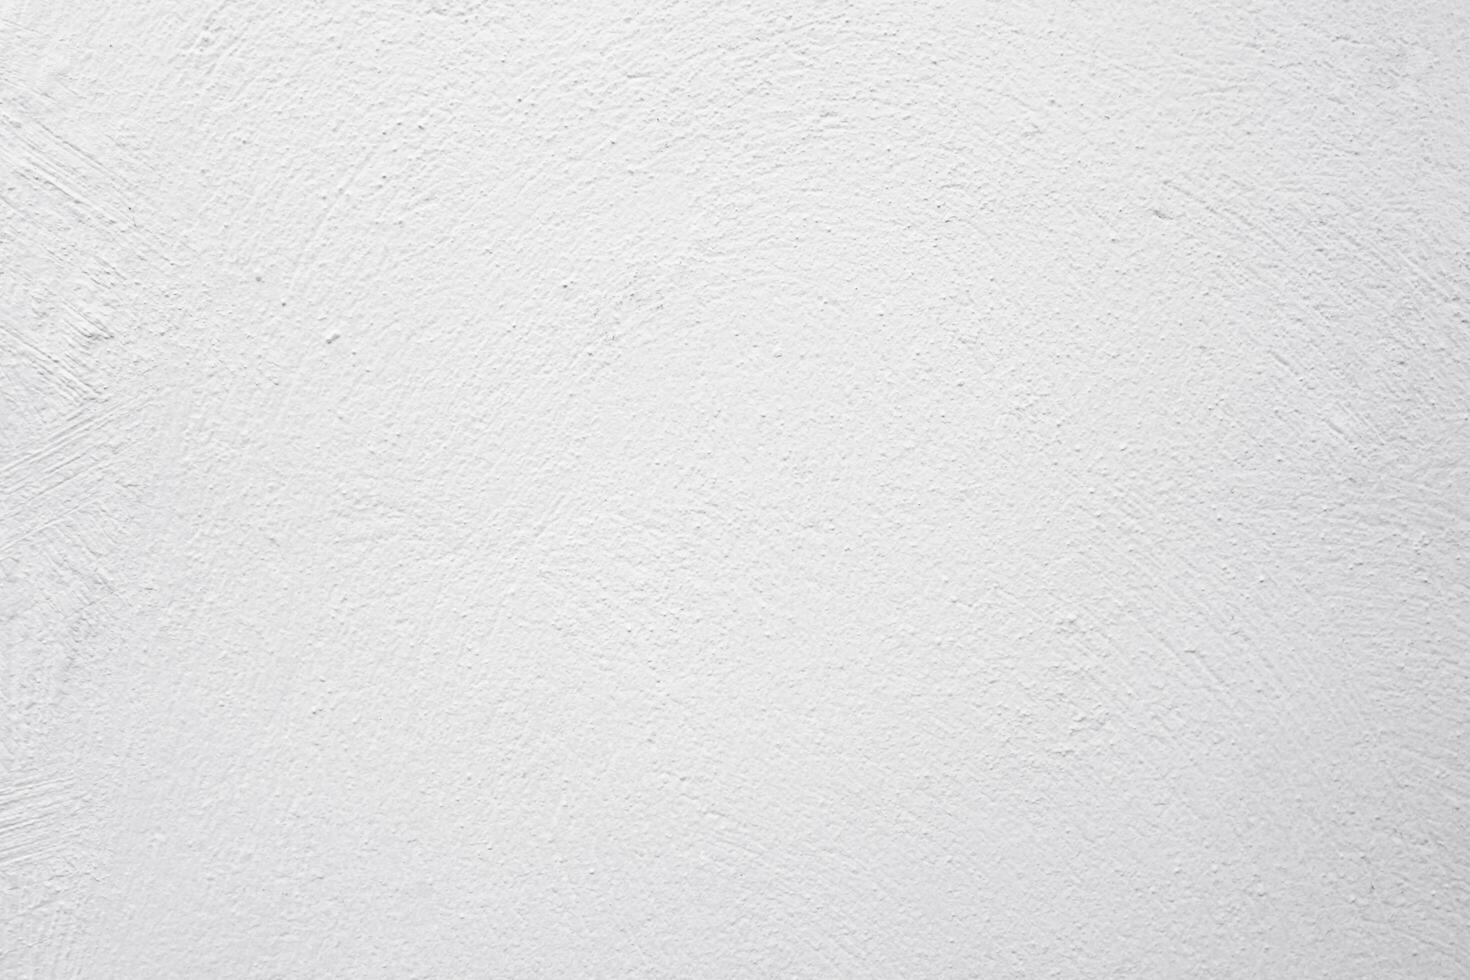 Concrete white wall texture,Rough cement floor surface with white paint,.Exterior Grey building wall with plaster photo